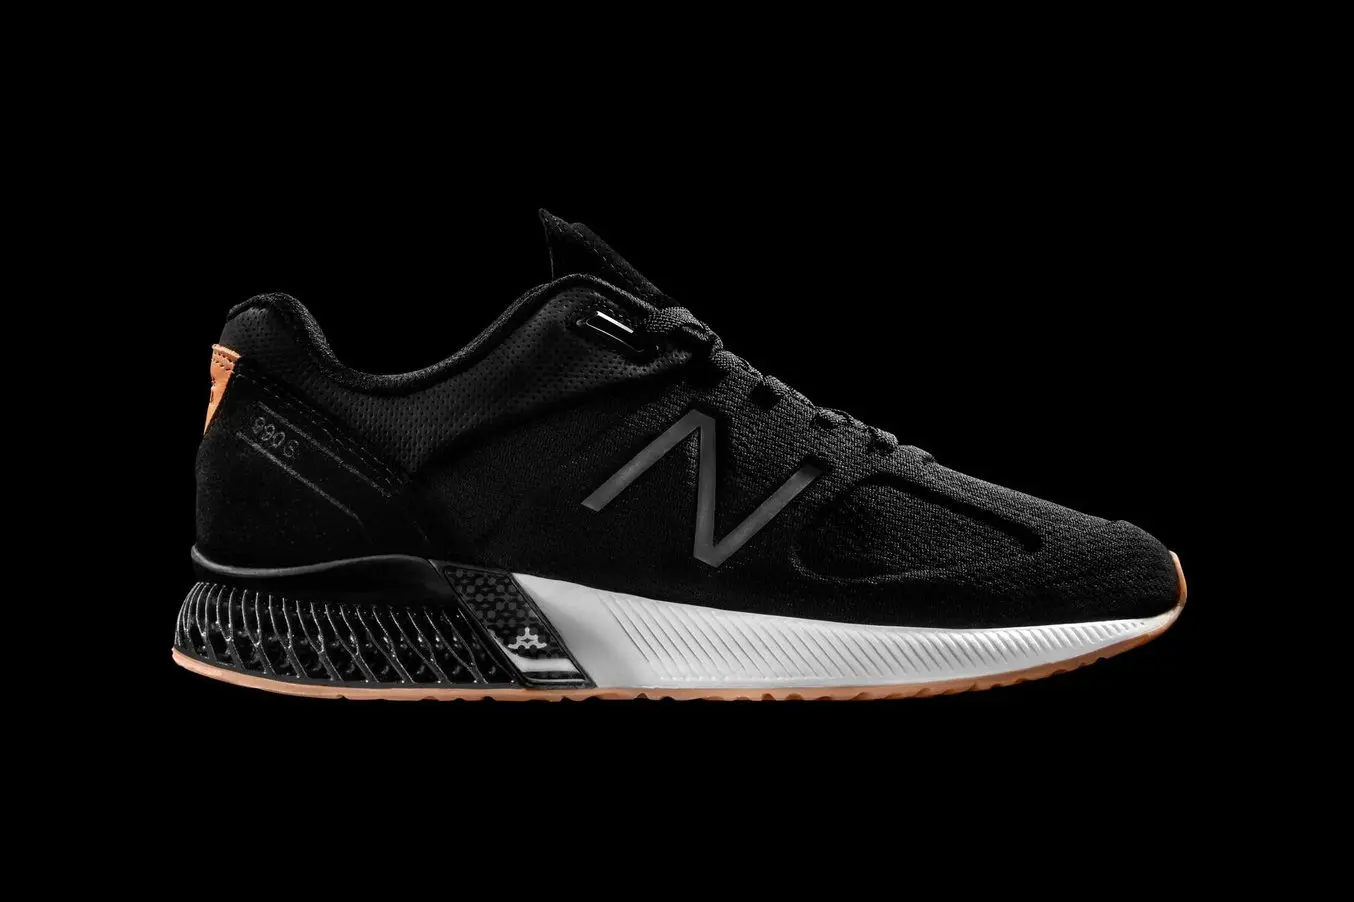 New Balance shoes incorporating Rebound Resin, a silicone-like 3D printing material.